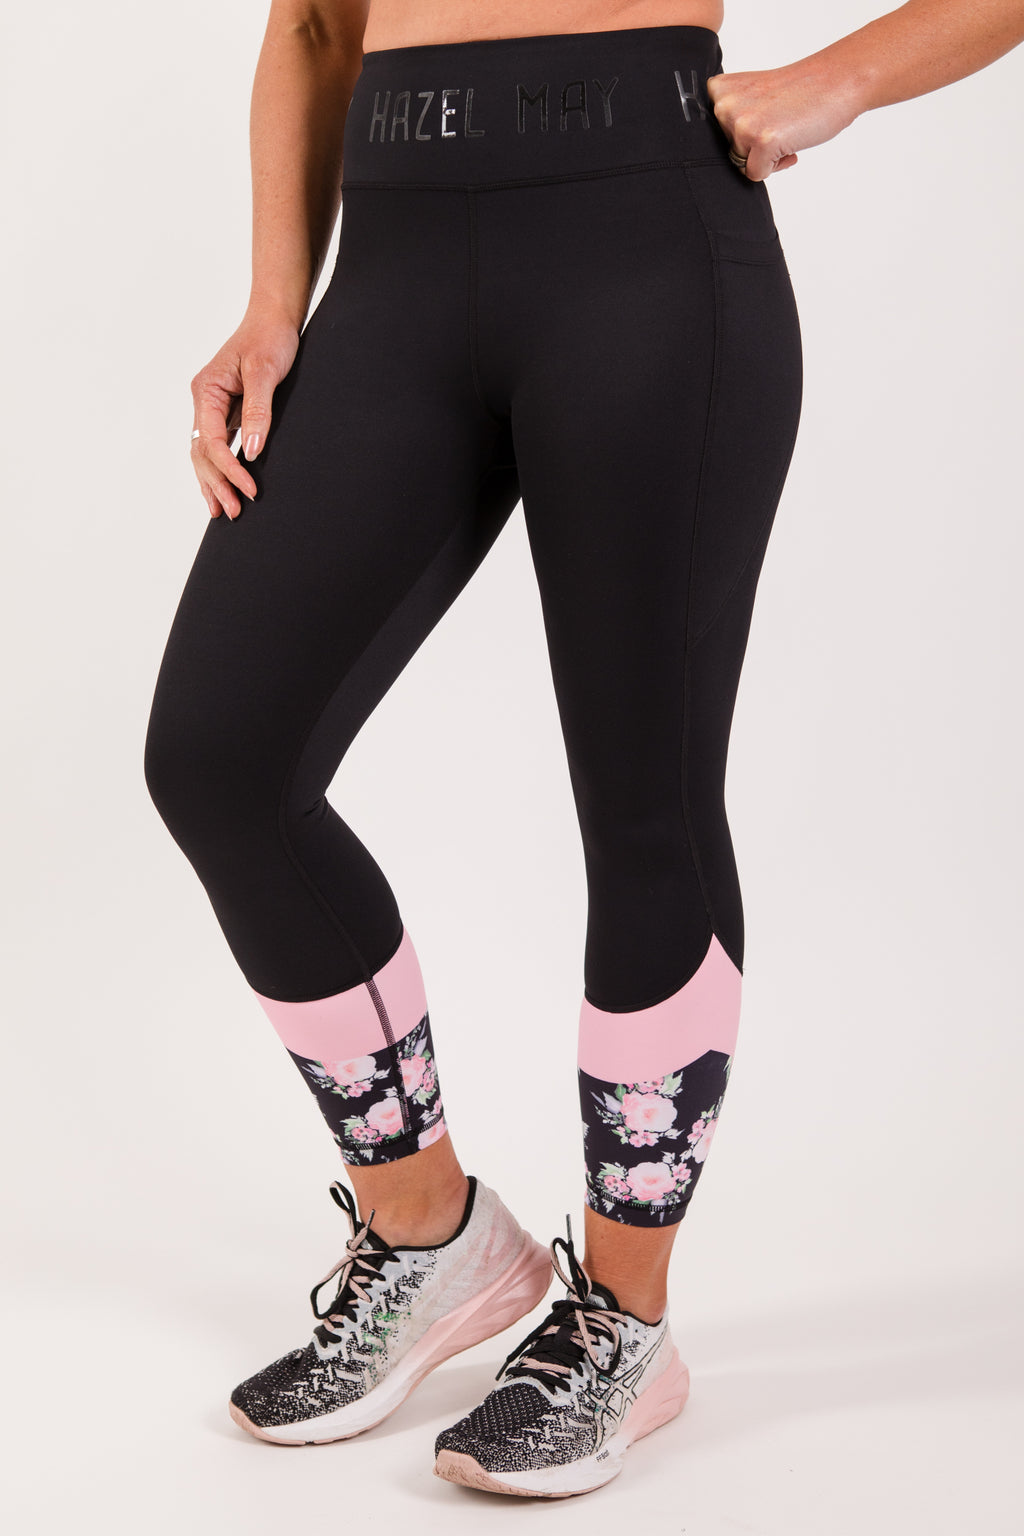 Freedom tight 7/8 - Black/ floral